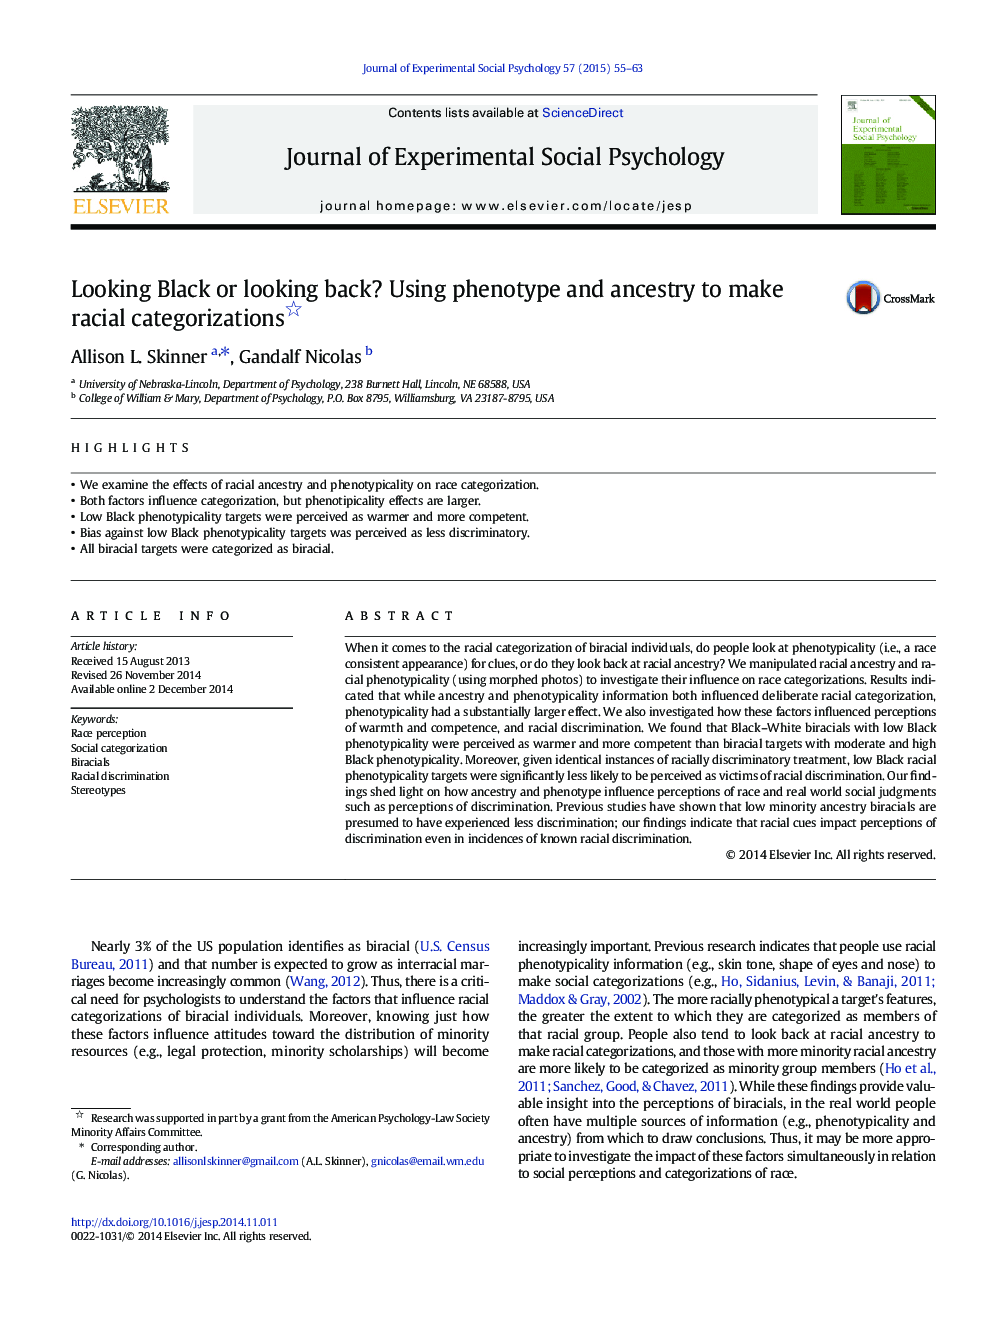 Looking Black or looking back? Using phenotype and ancestry to make racial categorizations 